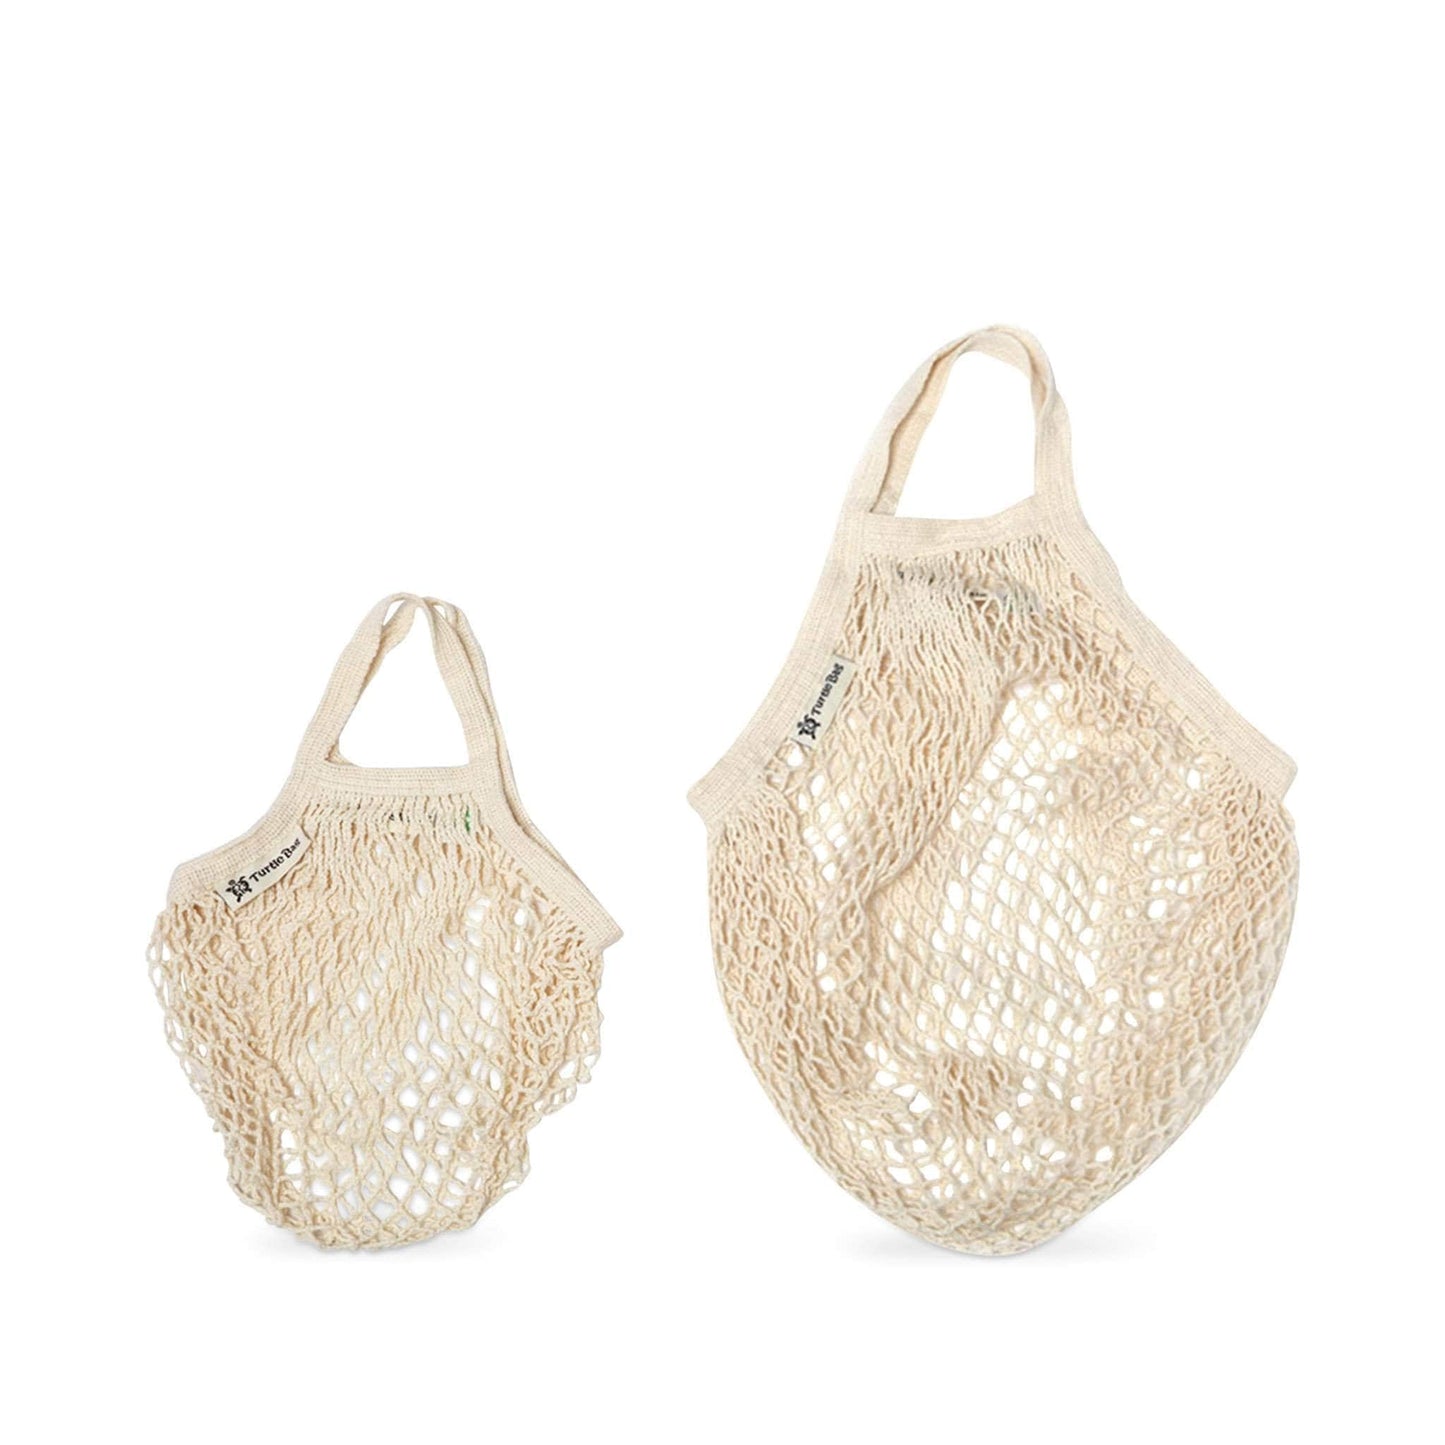 Load image into Gallery viewer, Turtle Bags Shopping Bags Turtle Bags - Shorthandled String Bags - Kids - Natural
